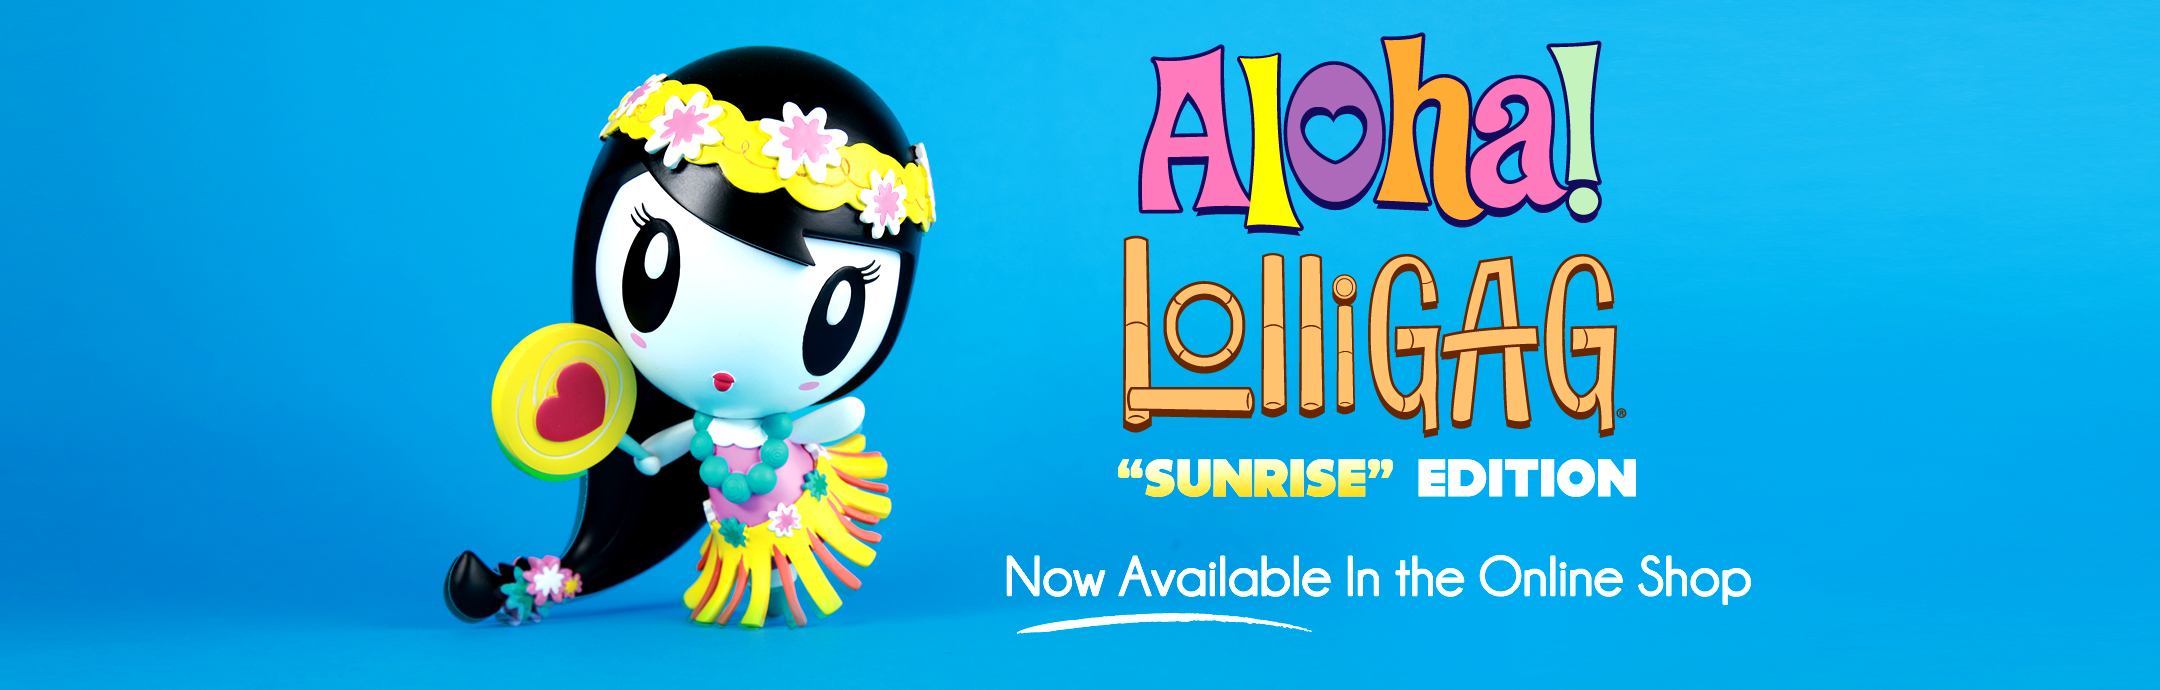 Lolligag Hula Sunrise Edition now available in the online store